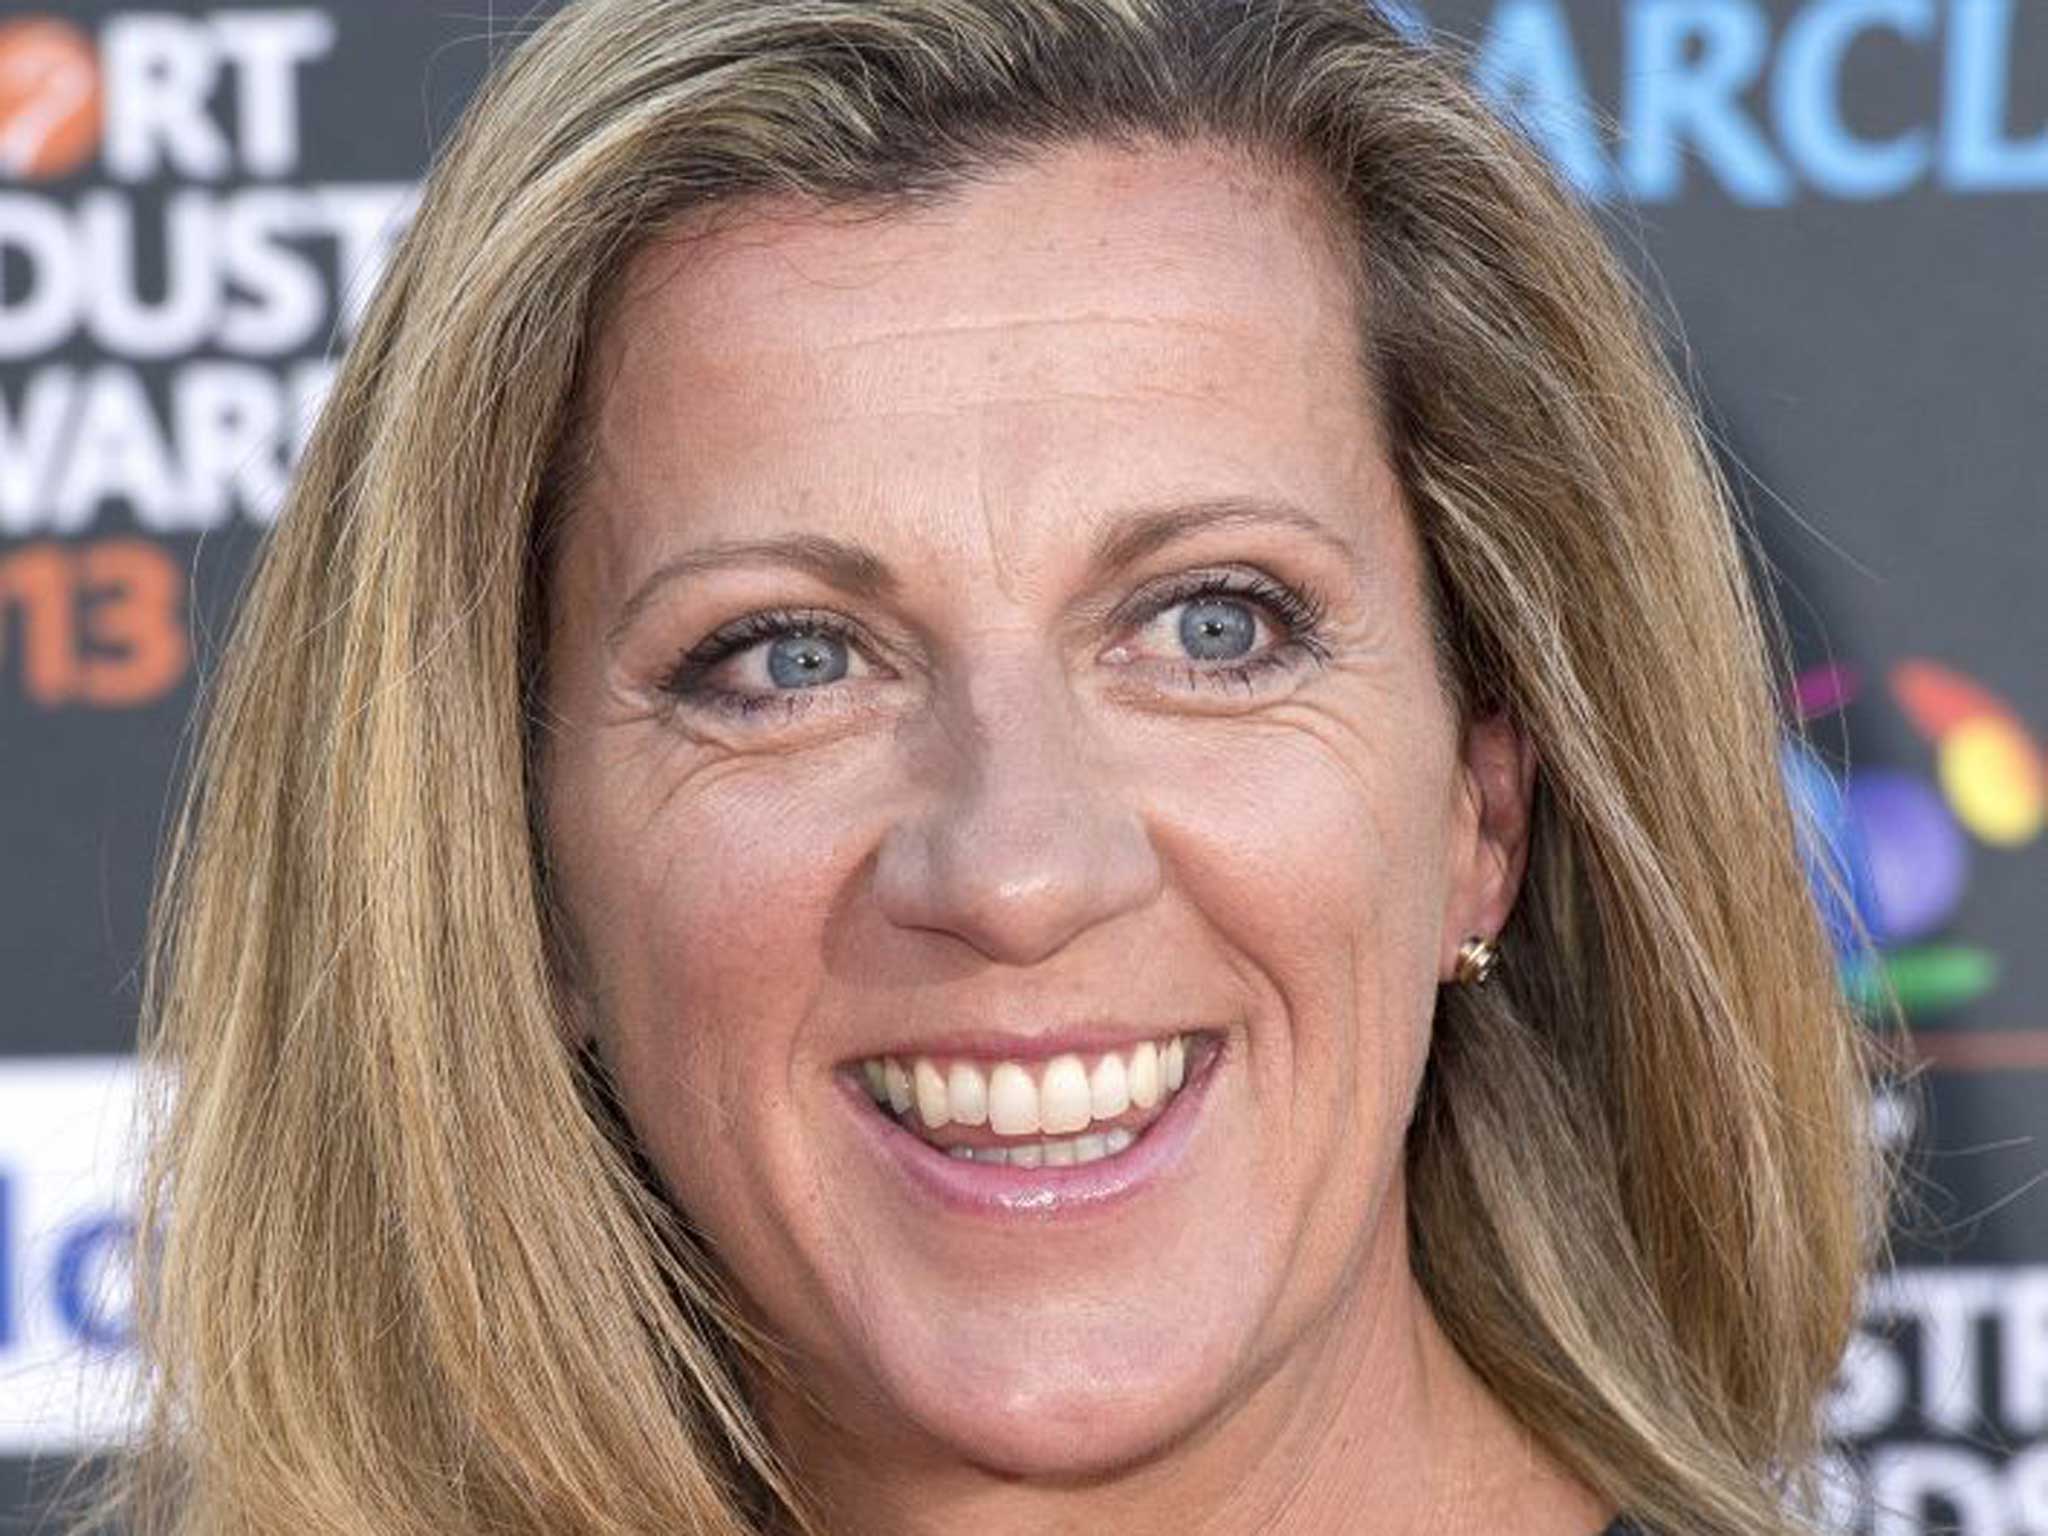 White choice: Olympic hurdler Sally Gunnell appointed to Sport England